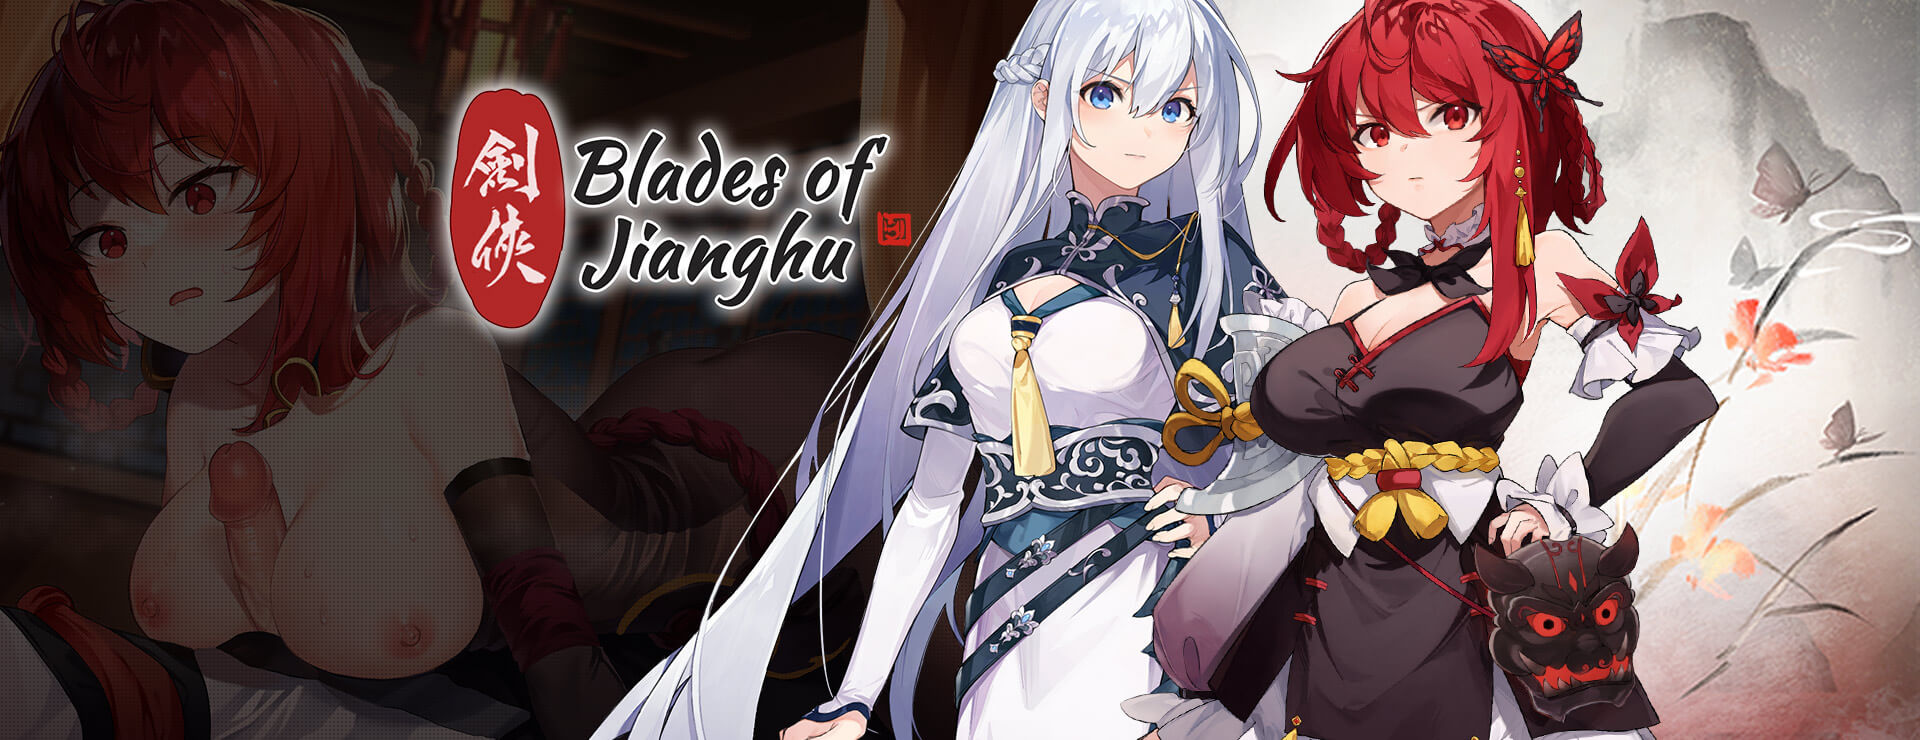 Blades of Jianghu: Ballad of Wind and Dust - RPG Juego